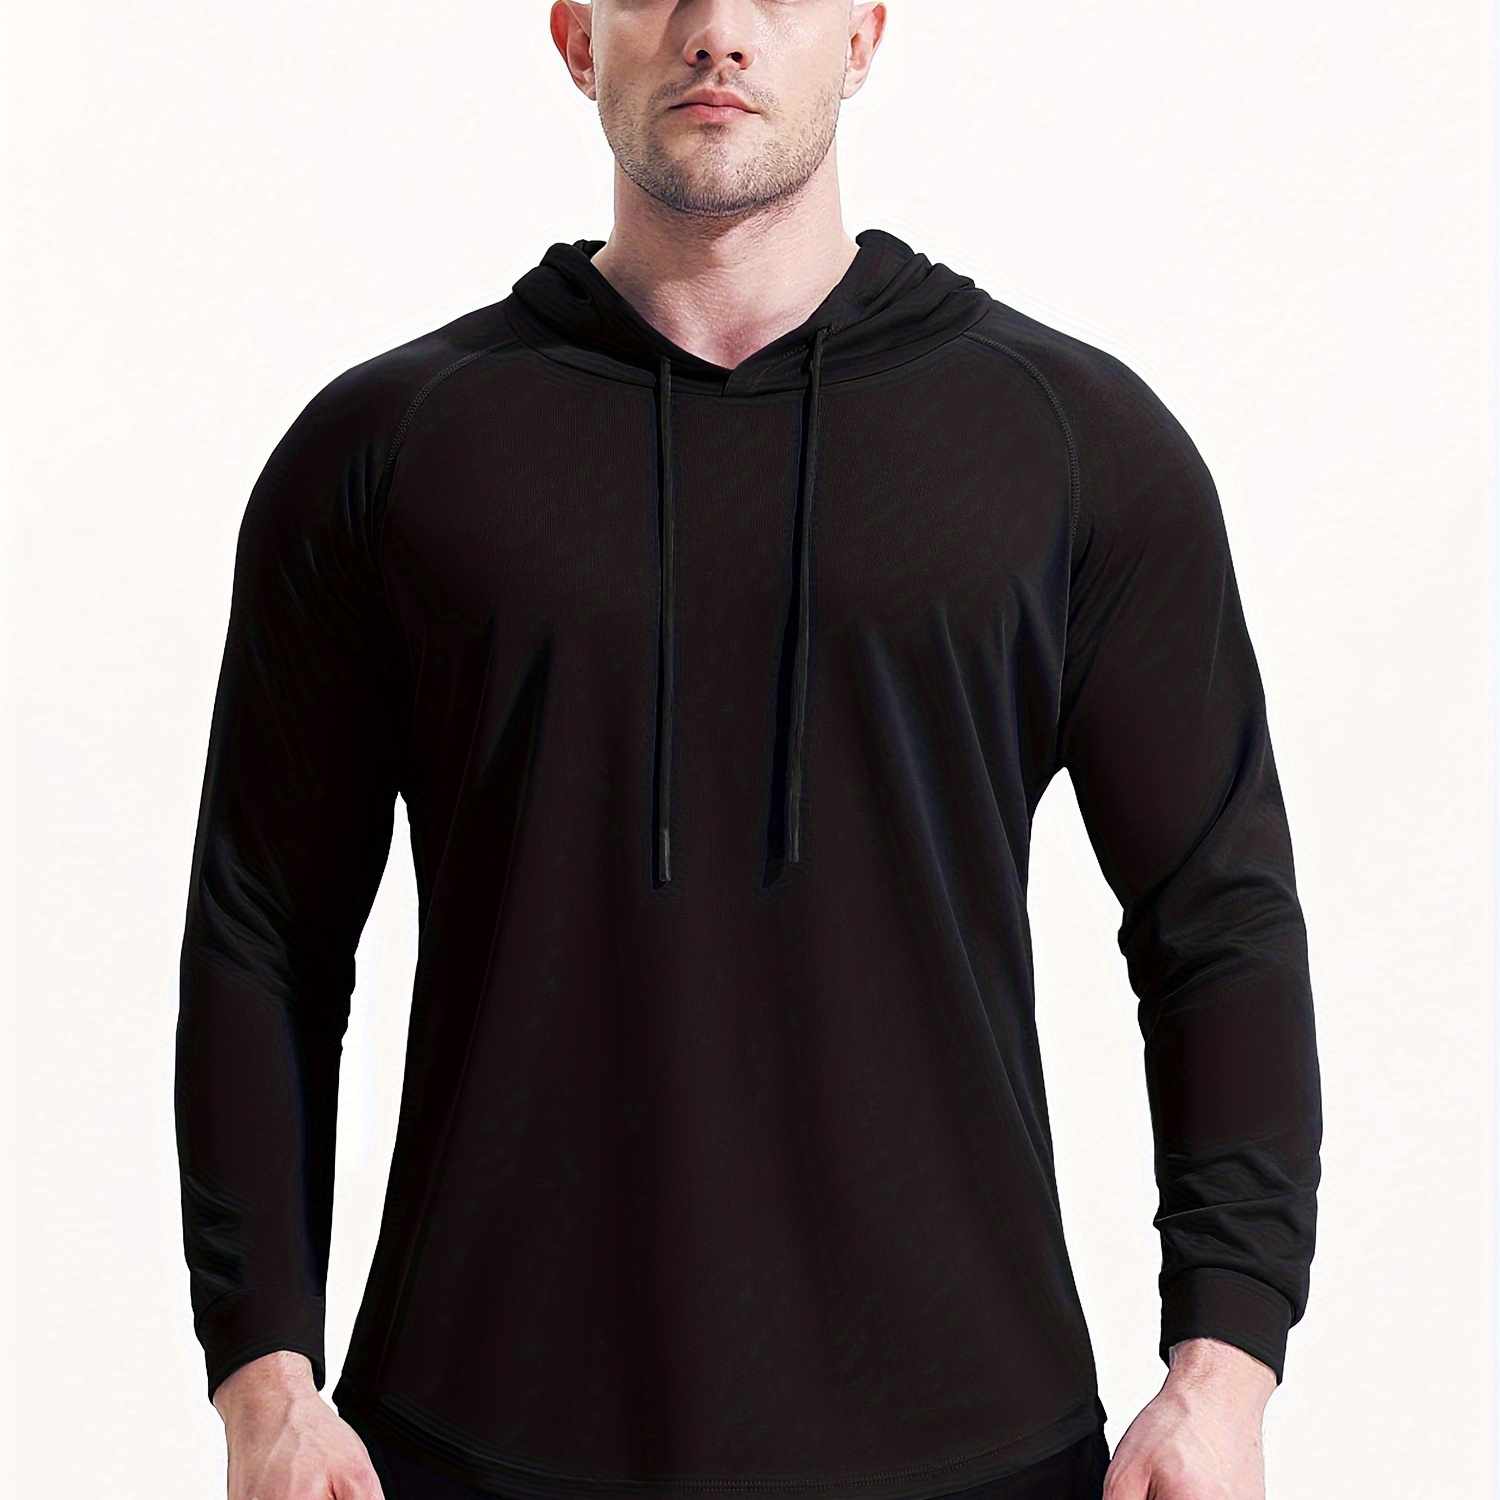 

Quick-drying Men's Fitness Hoodie For Basketball, Running, Exercise & Yoga - Sweat-absorbing & Breathable Sports Base Layer